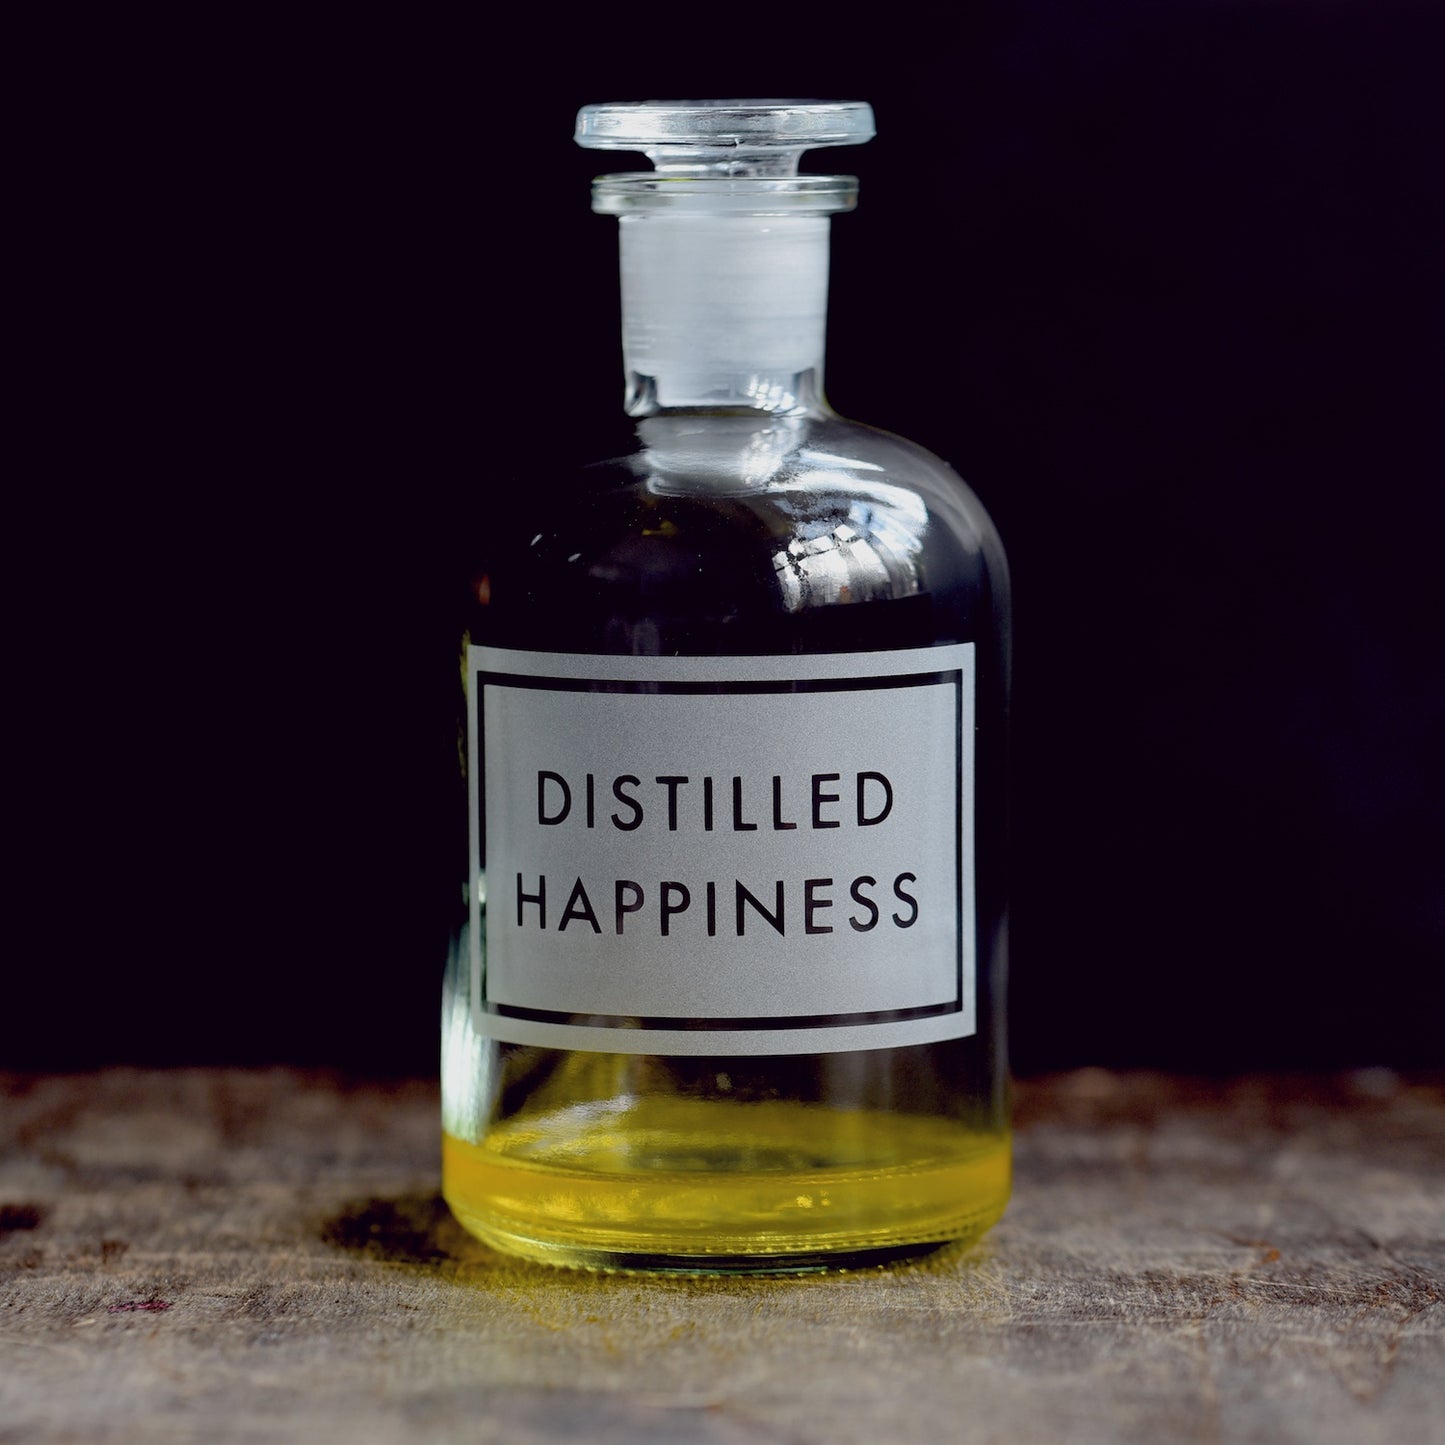 'Distilled Happiness' etched glass apothecary bottle